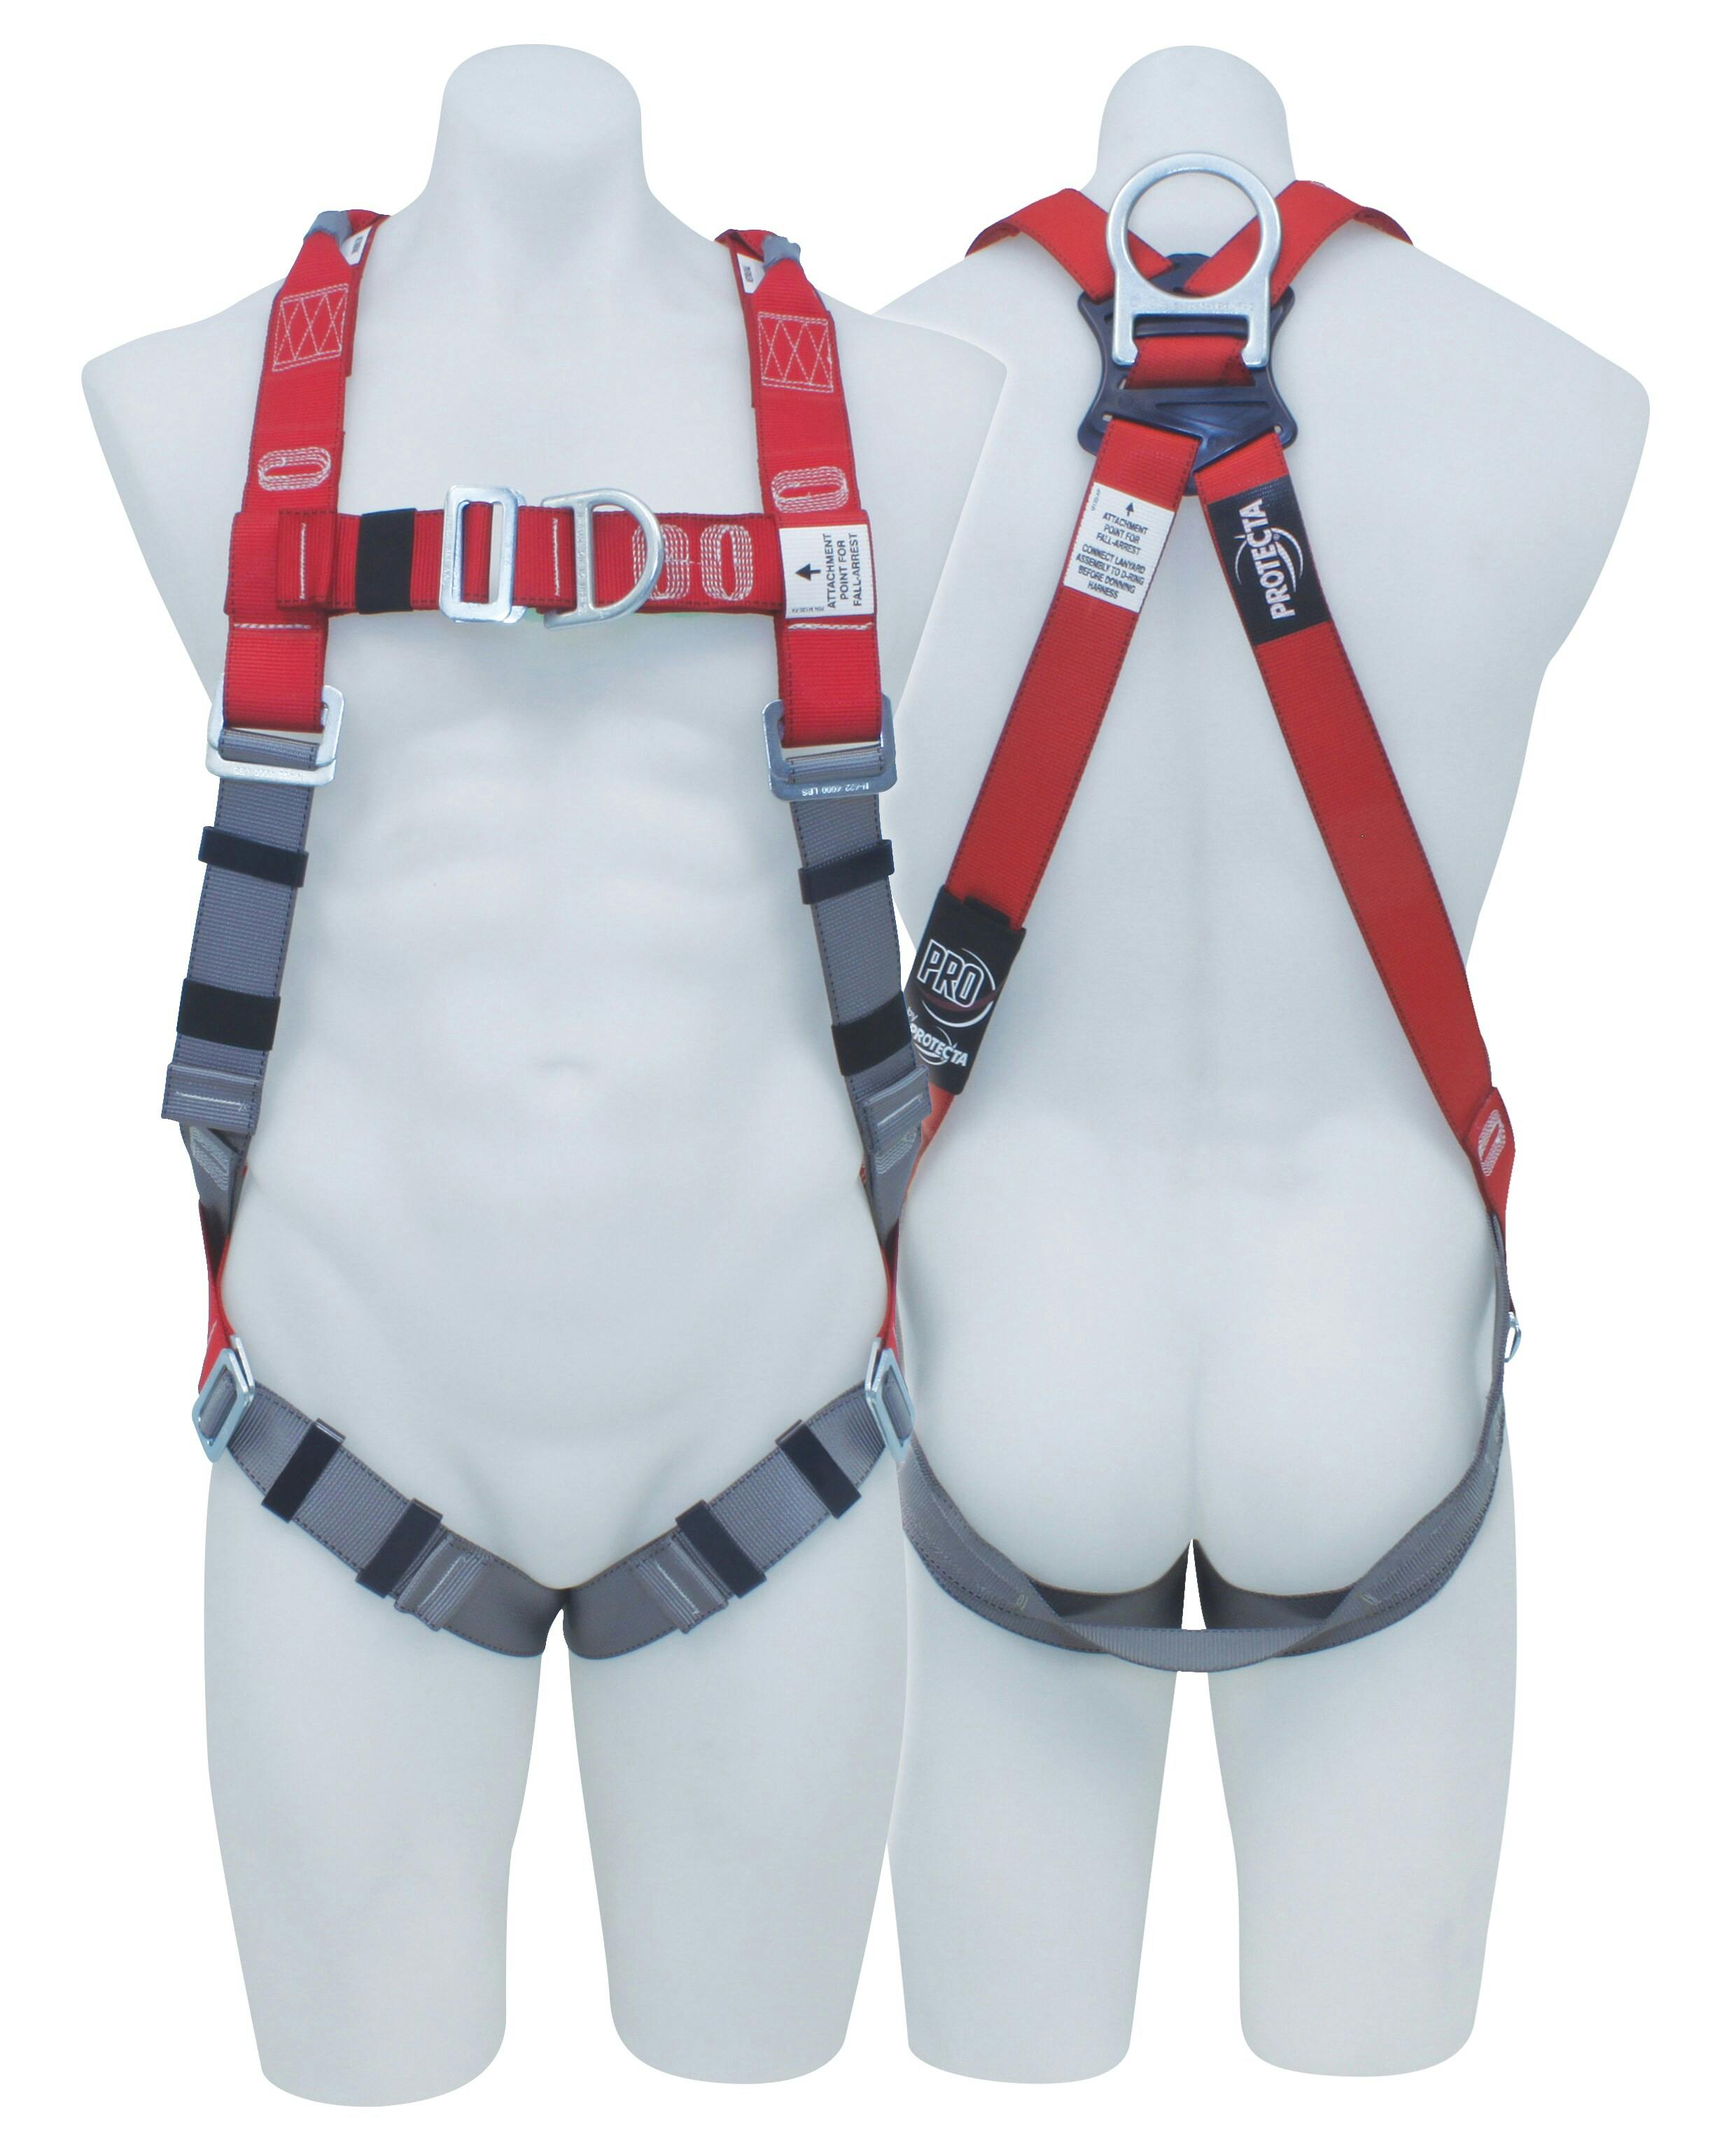 3M™ PROTECTA® PRO Riggers Harness AB123M, Red and Grey, Medium, 1 EA/Case